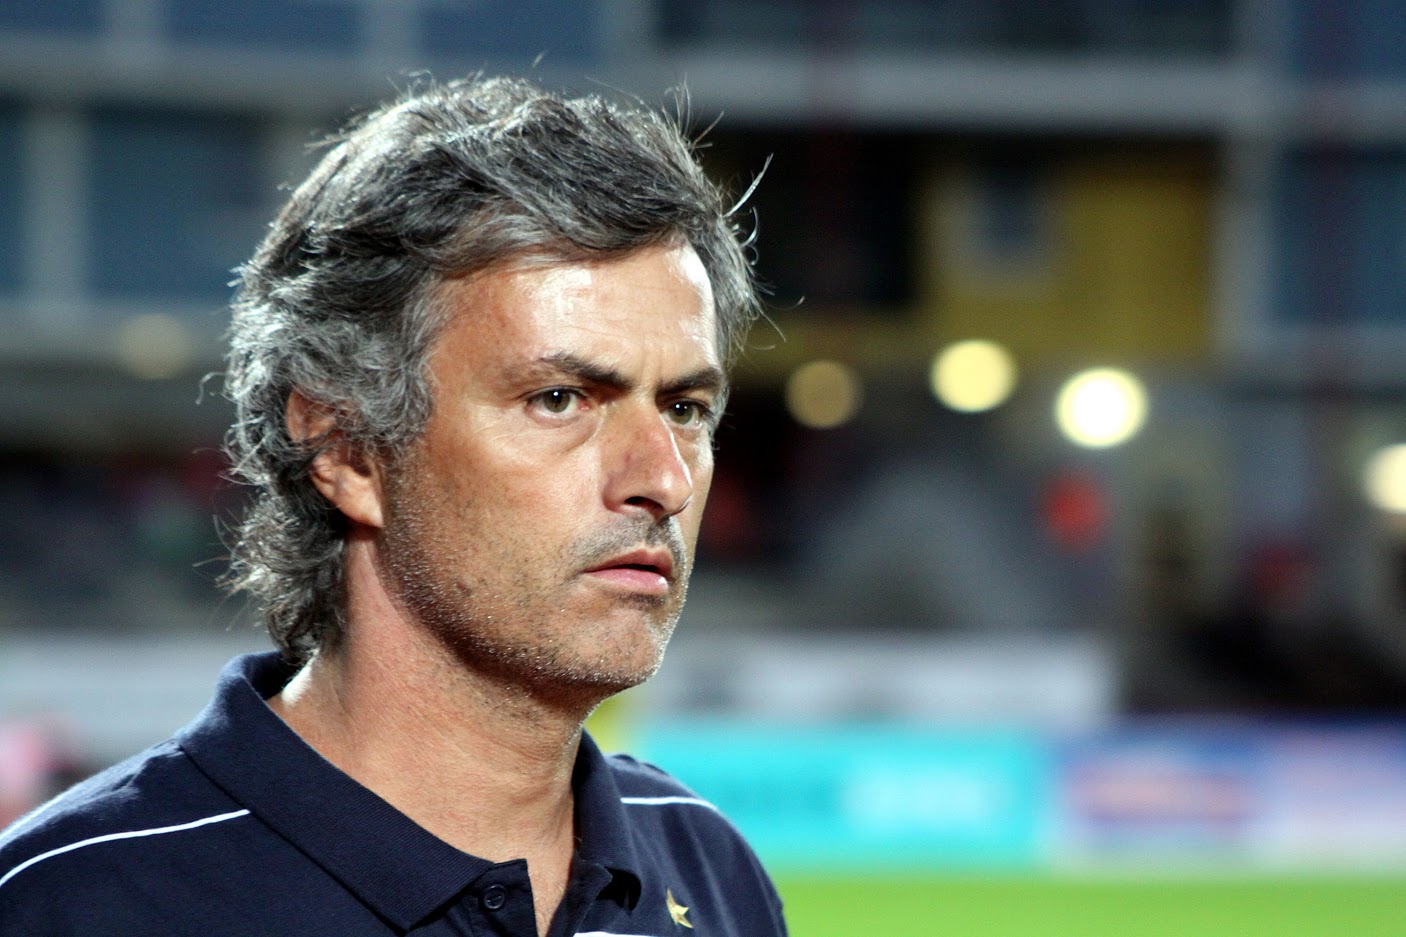 Jose Mourinho, age 37, took charge of Benfica in his first major managerial role.